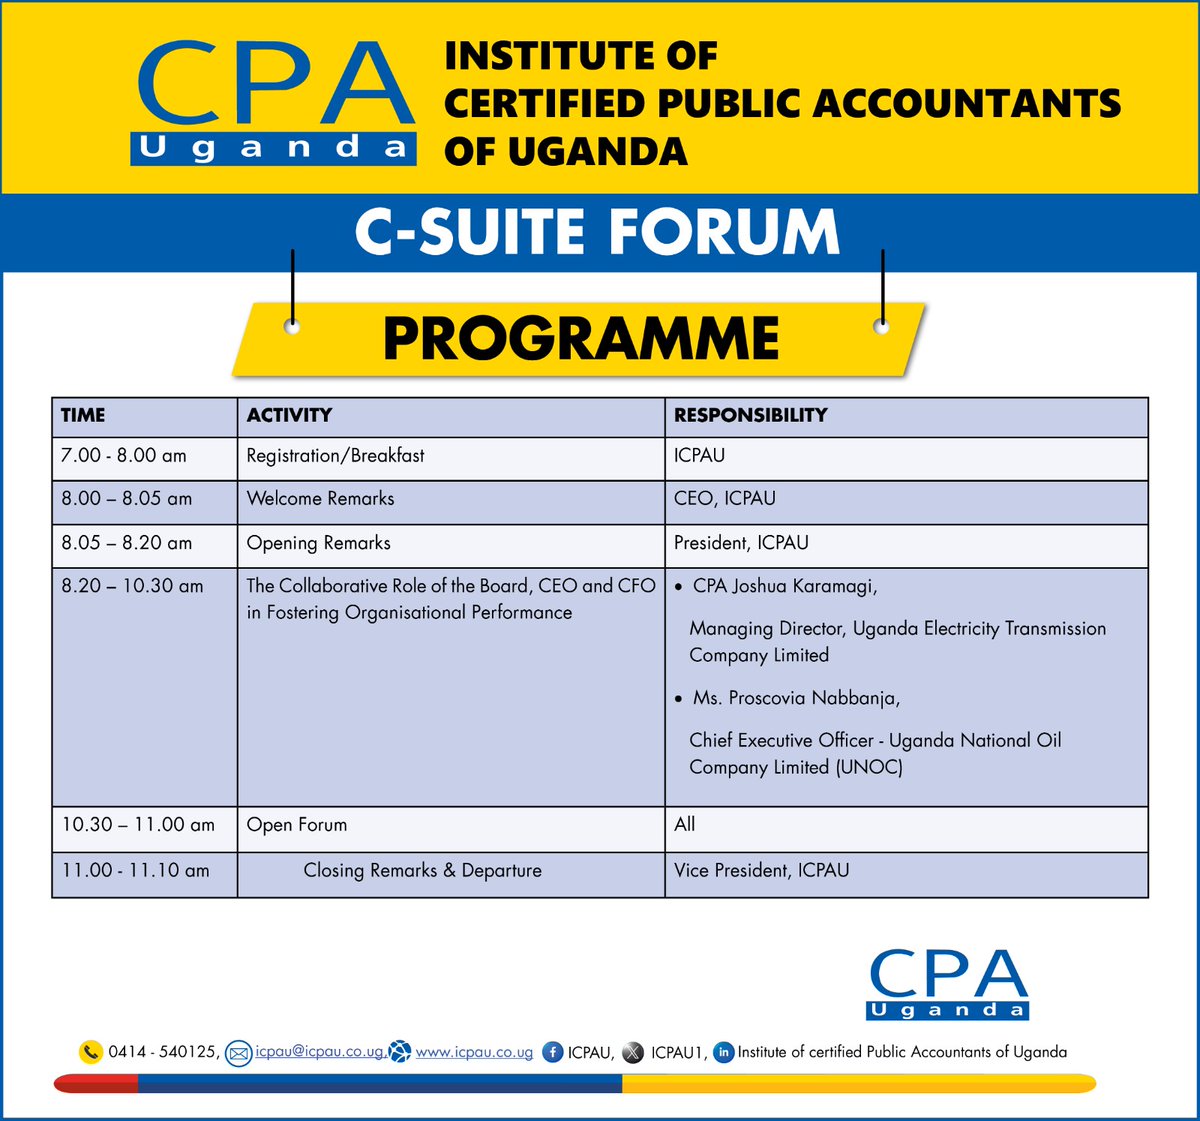 The C-Suite Forum kicks off in a bit, here is today's programme lineup, we are starting with opening remarks from ICPAU, followed by a panel discussion and presentation on the collaborative role of the Board, CEO, and CFO function.

Stay tuned!
#WeCreateImpact
#2ndCSuiteForum